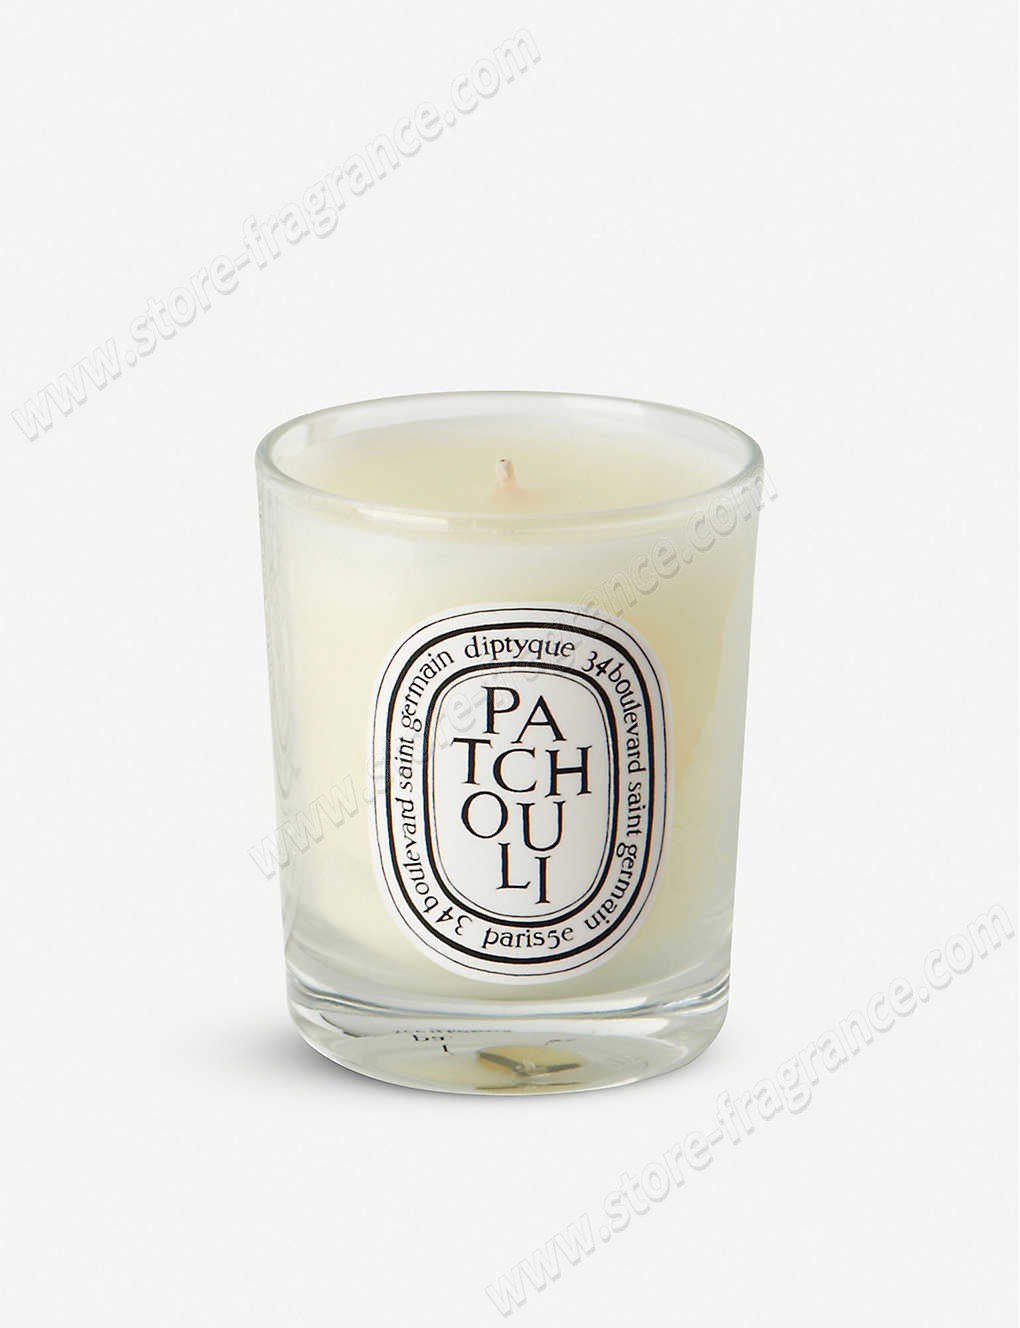 DIPTYQUE/Patchouli scented candle ✿ Discount Store - DIPTYQUE/Patchouli scented candle ✿ Discount Store